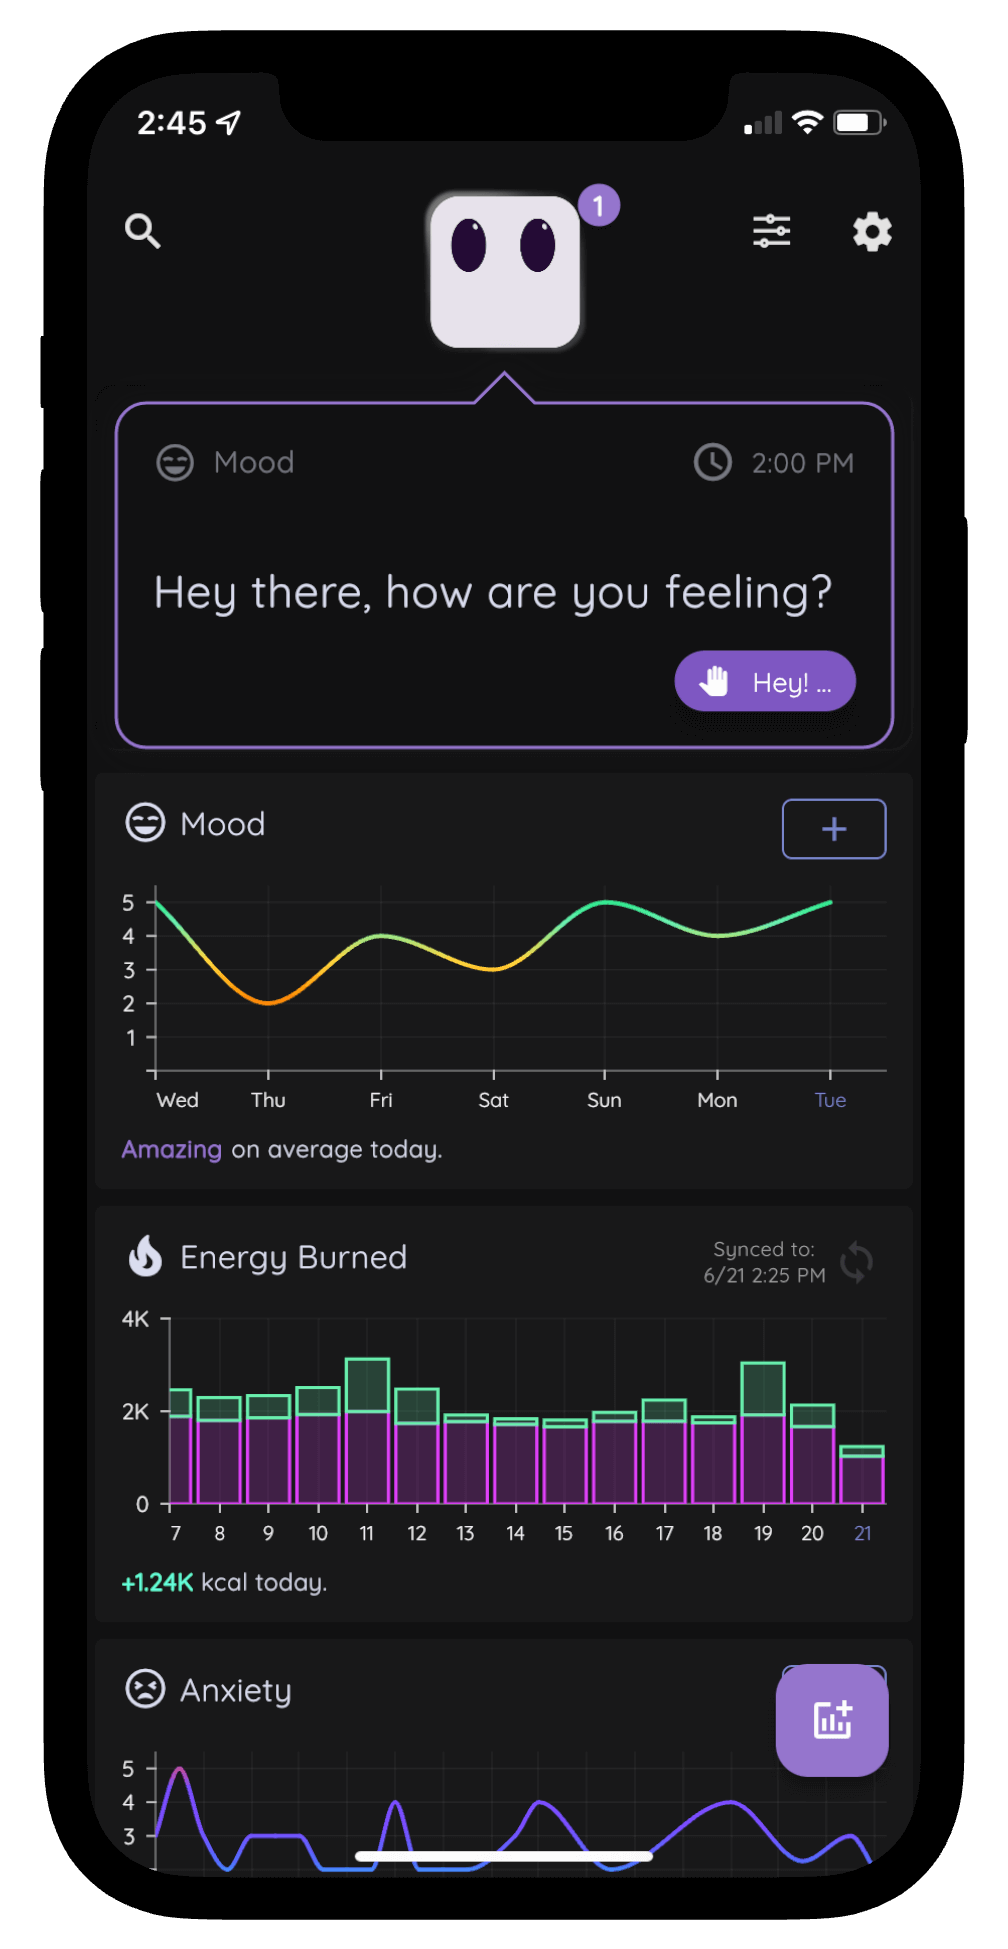 Mood tracker app dashboard with mood, energy burned, and anxiety tracking chart